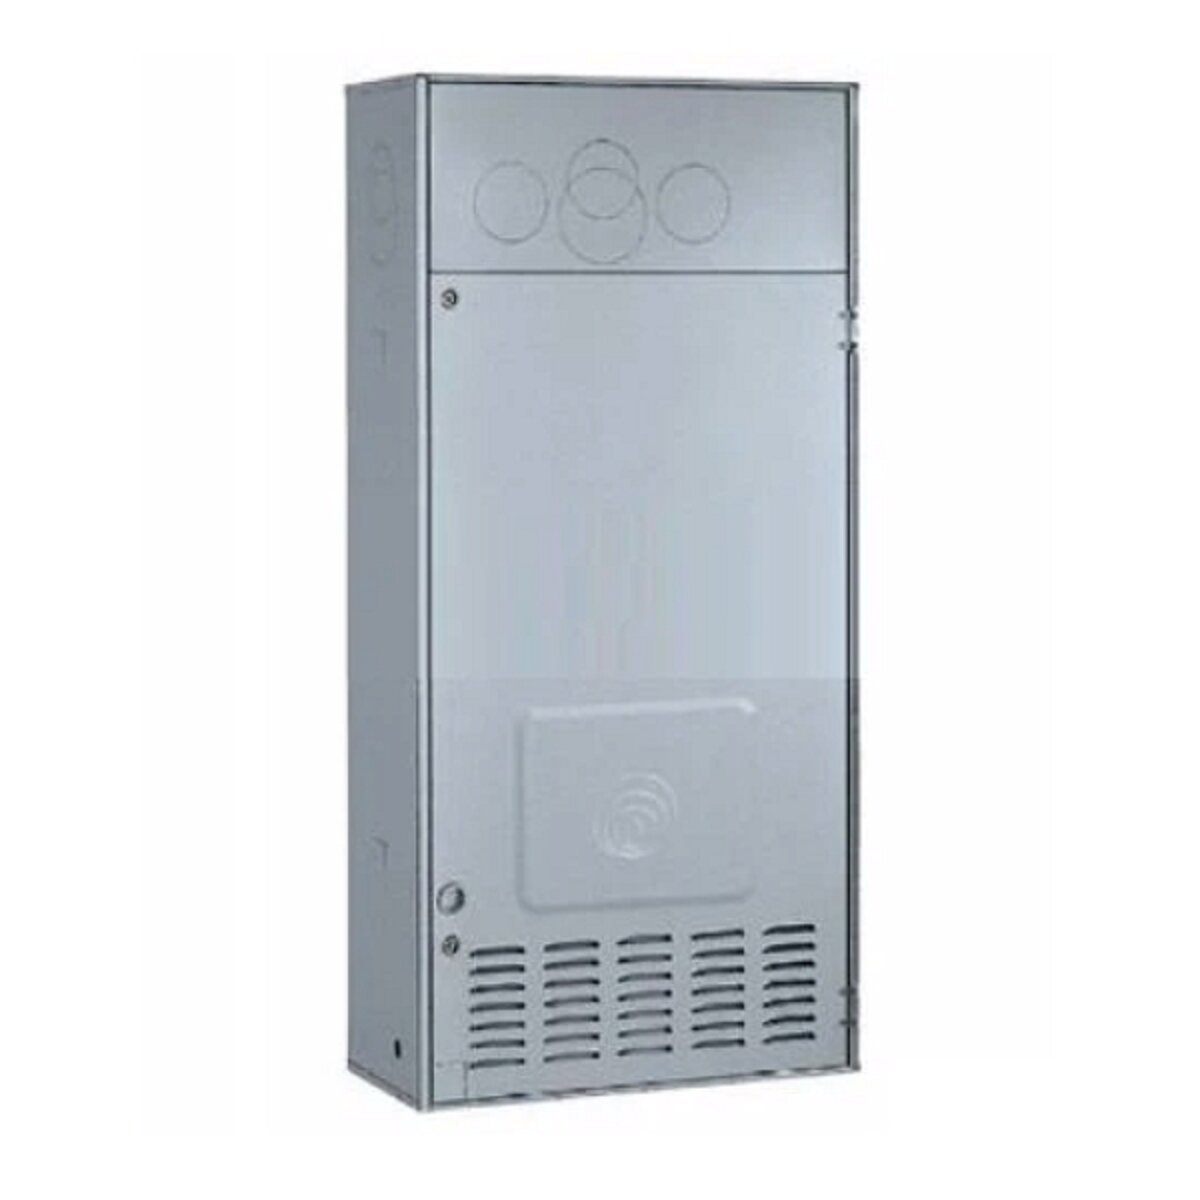 Built-in unit Immergas omni container box universal boiler